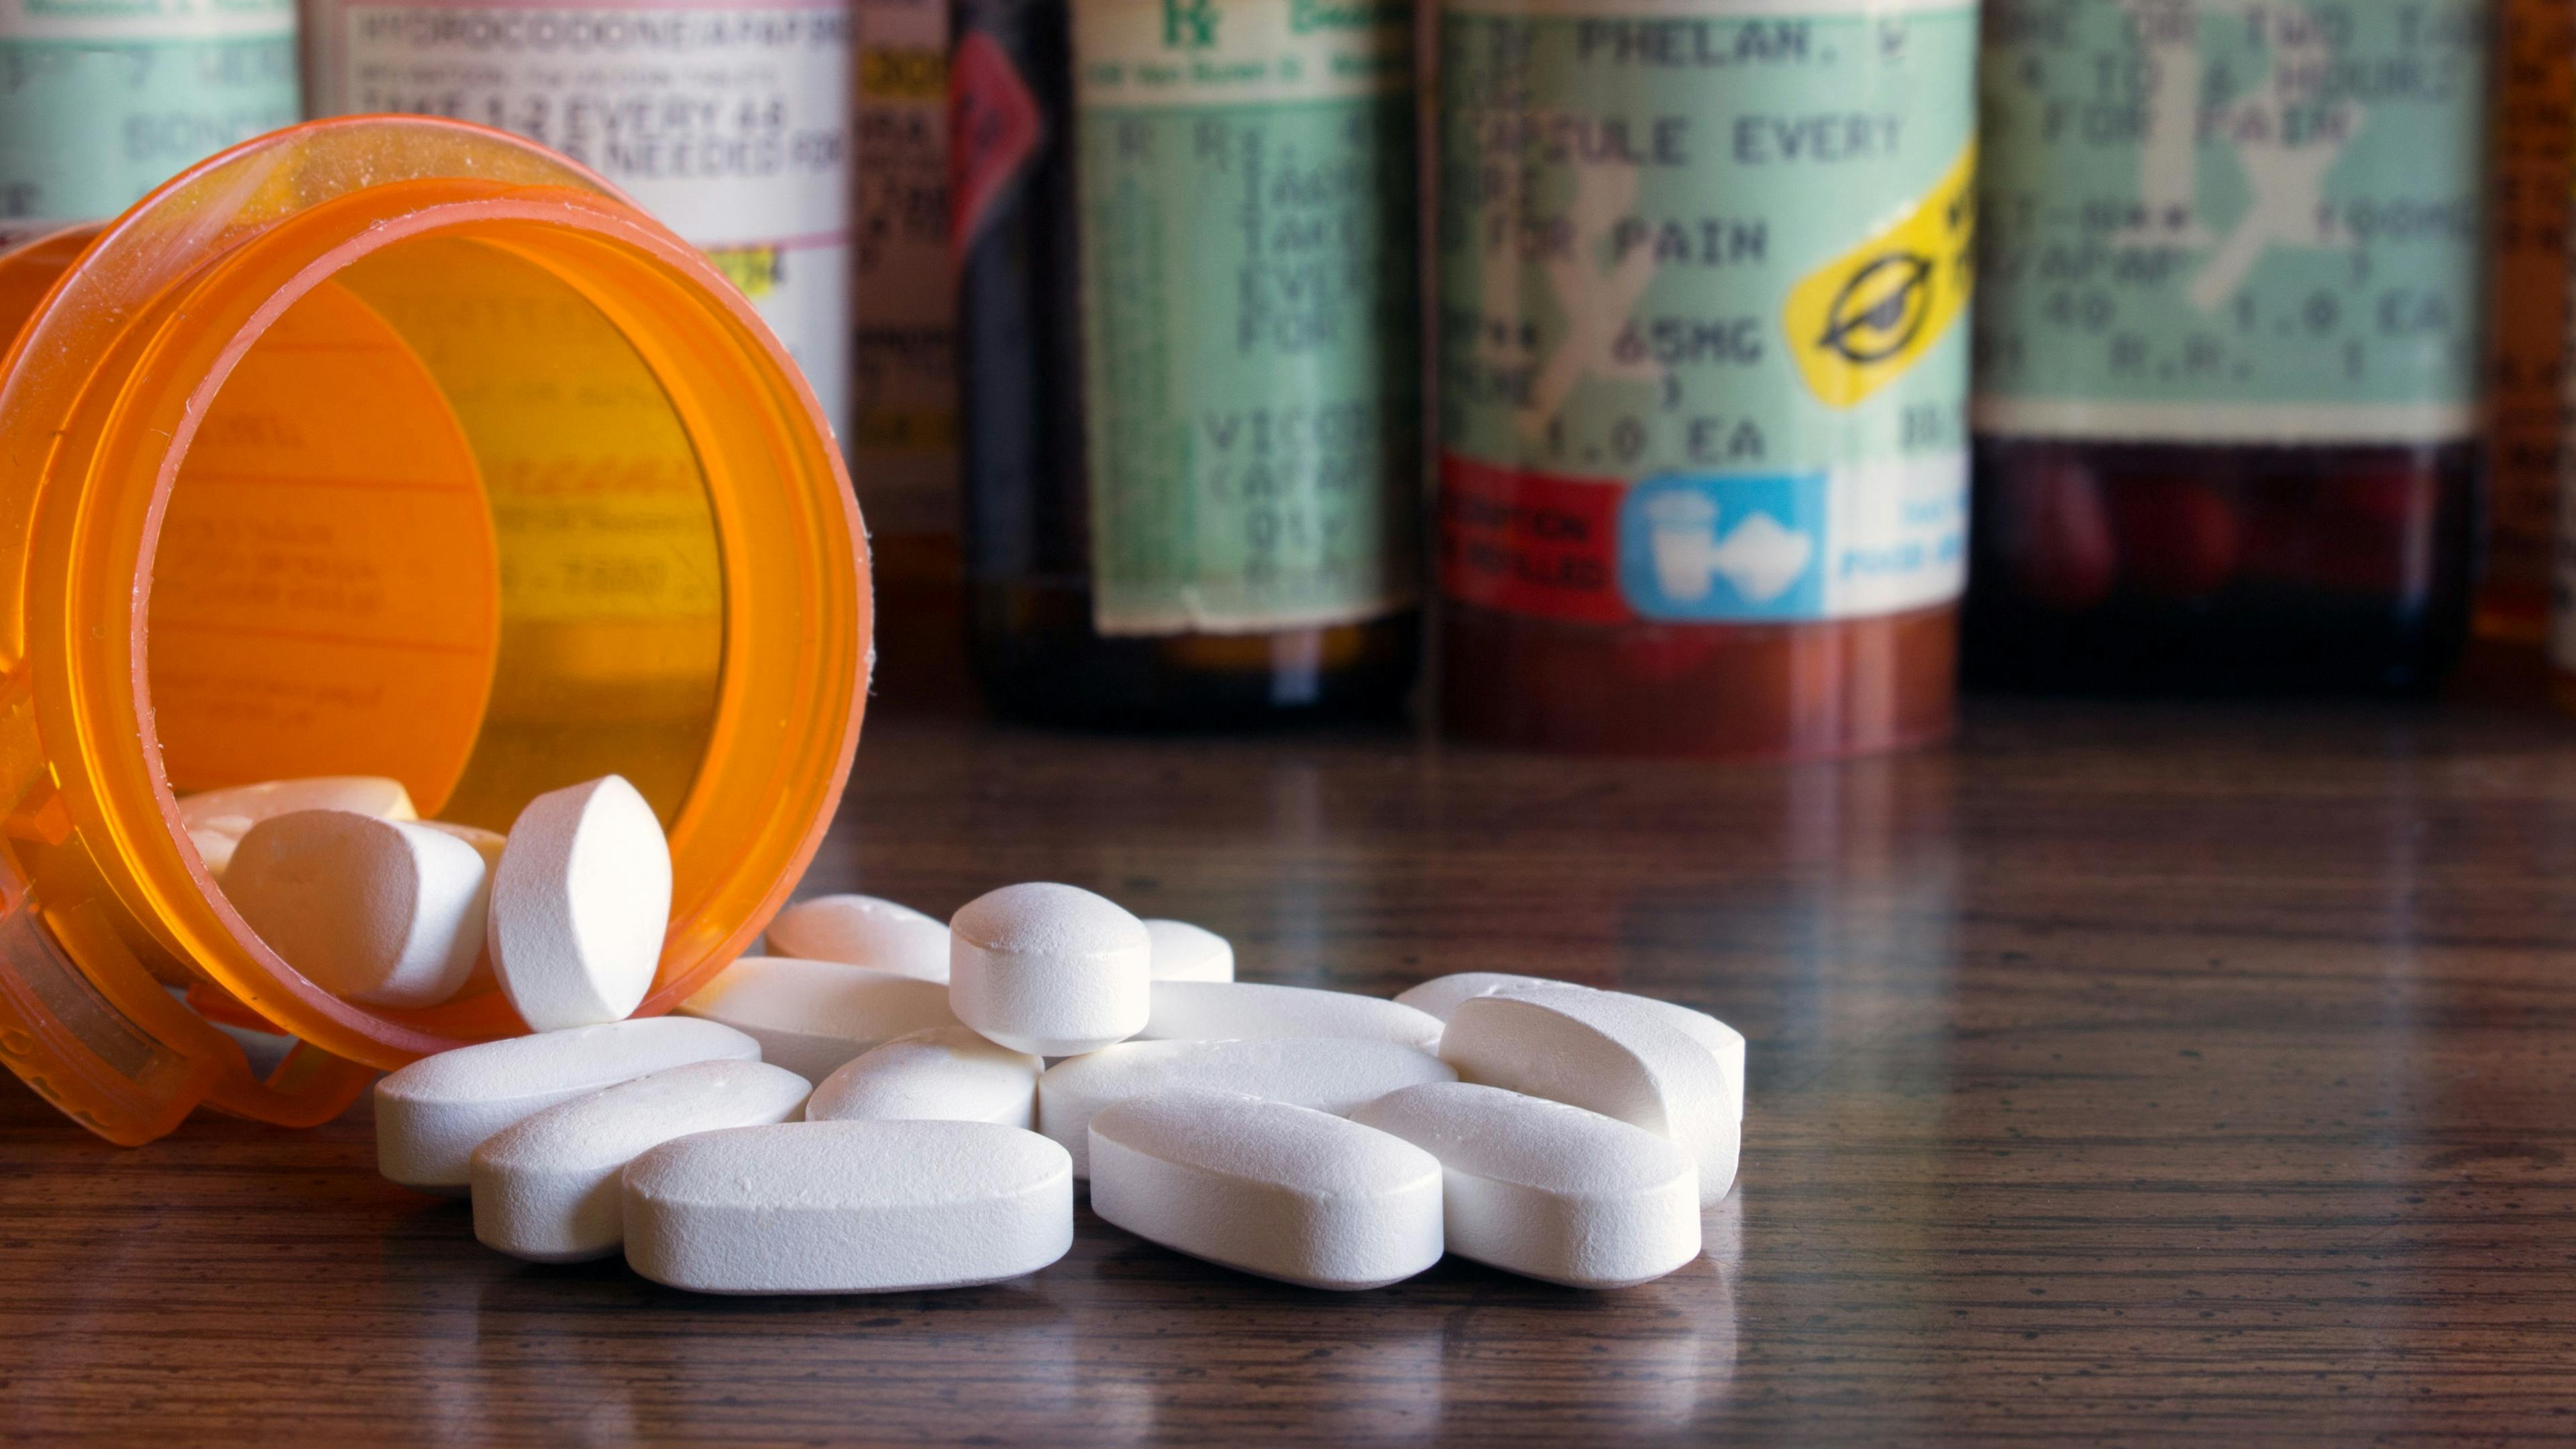 Prescription opioids with many bottles of pills in the bBackground. Concepts of addiction, opioid crisis, overdose and doctor shopping - Image credit: Kimberly Boyles | stock.adobe.com